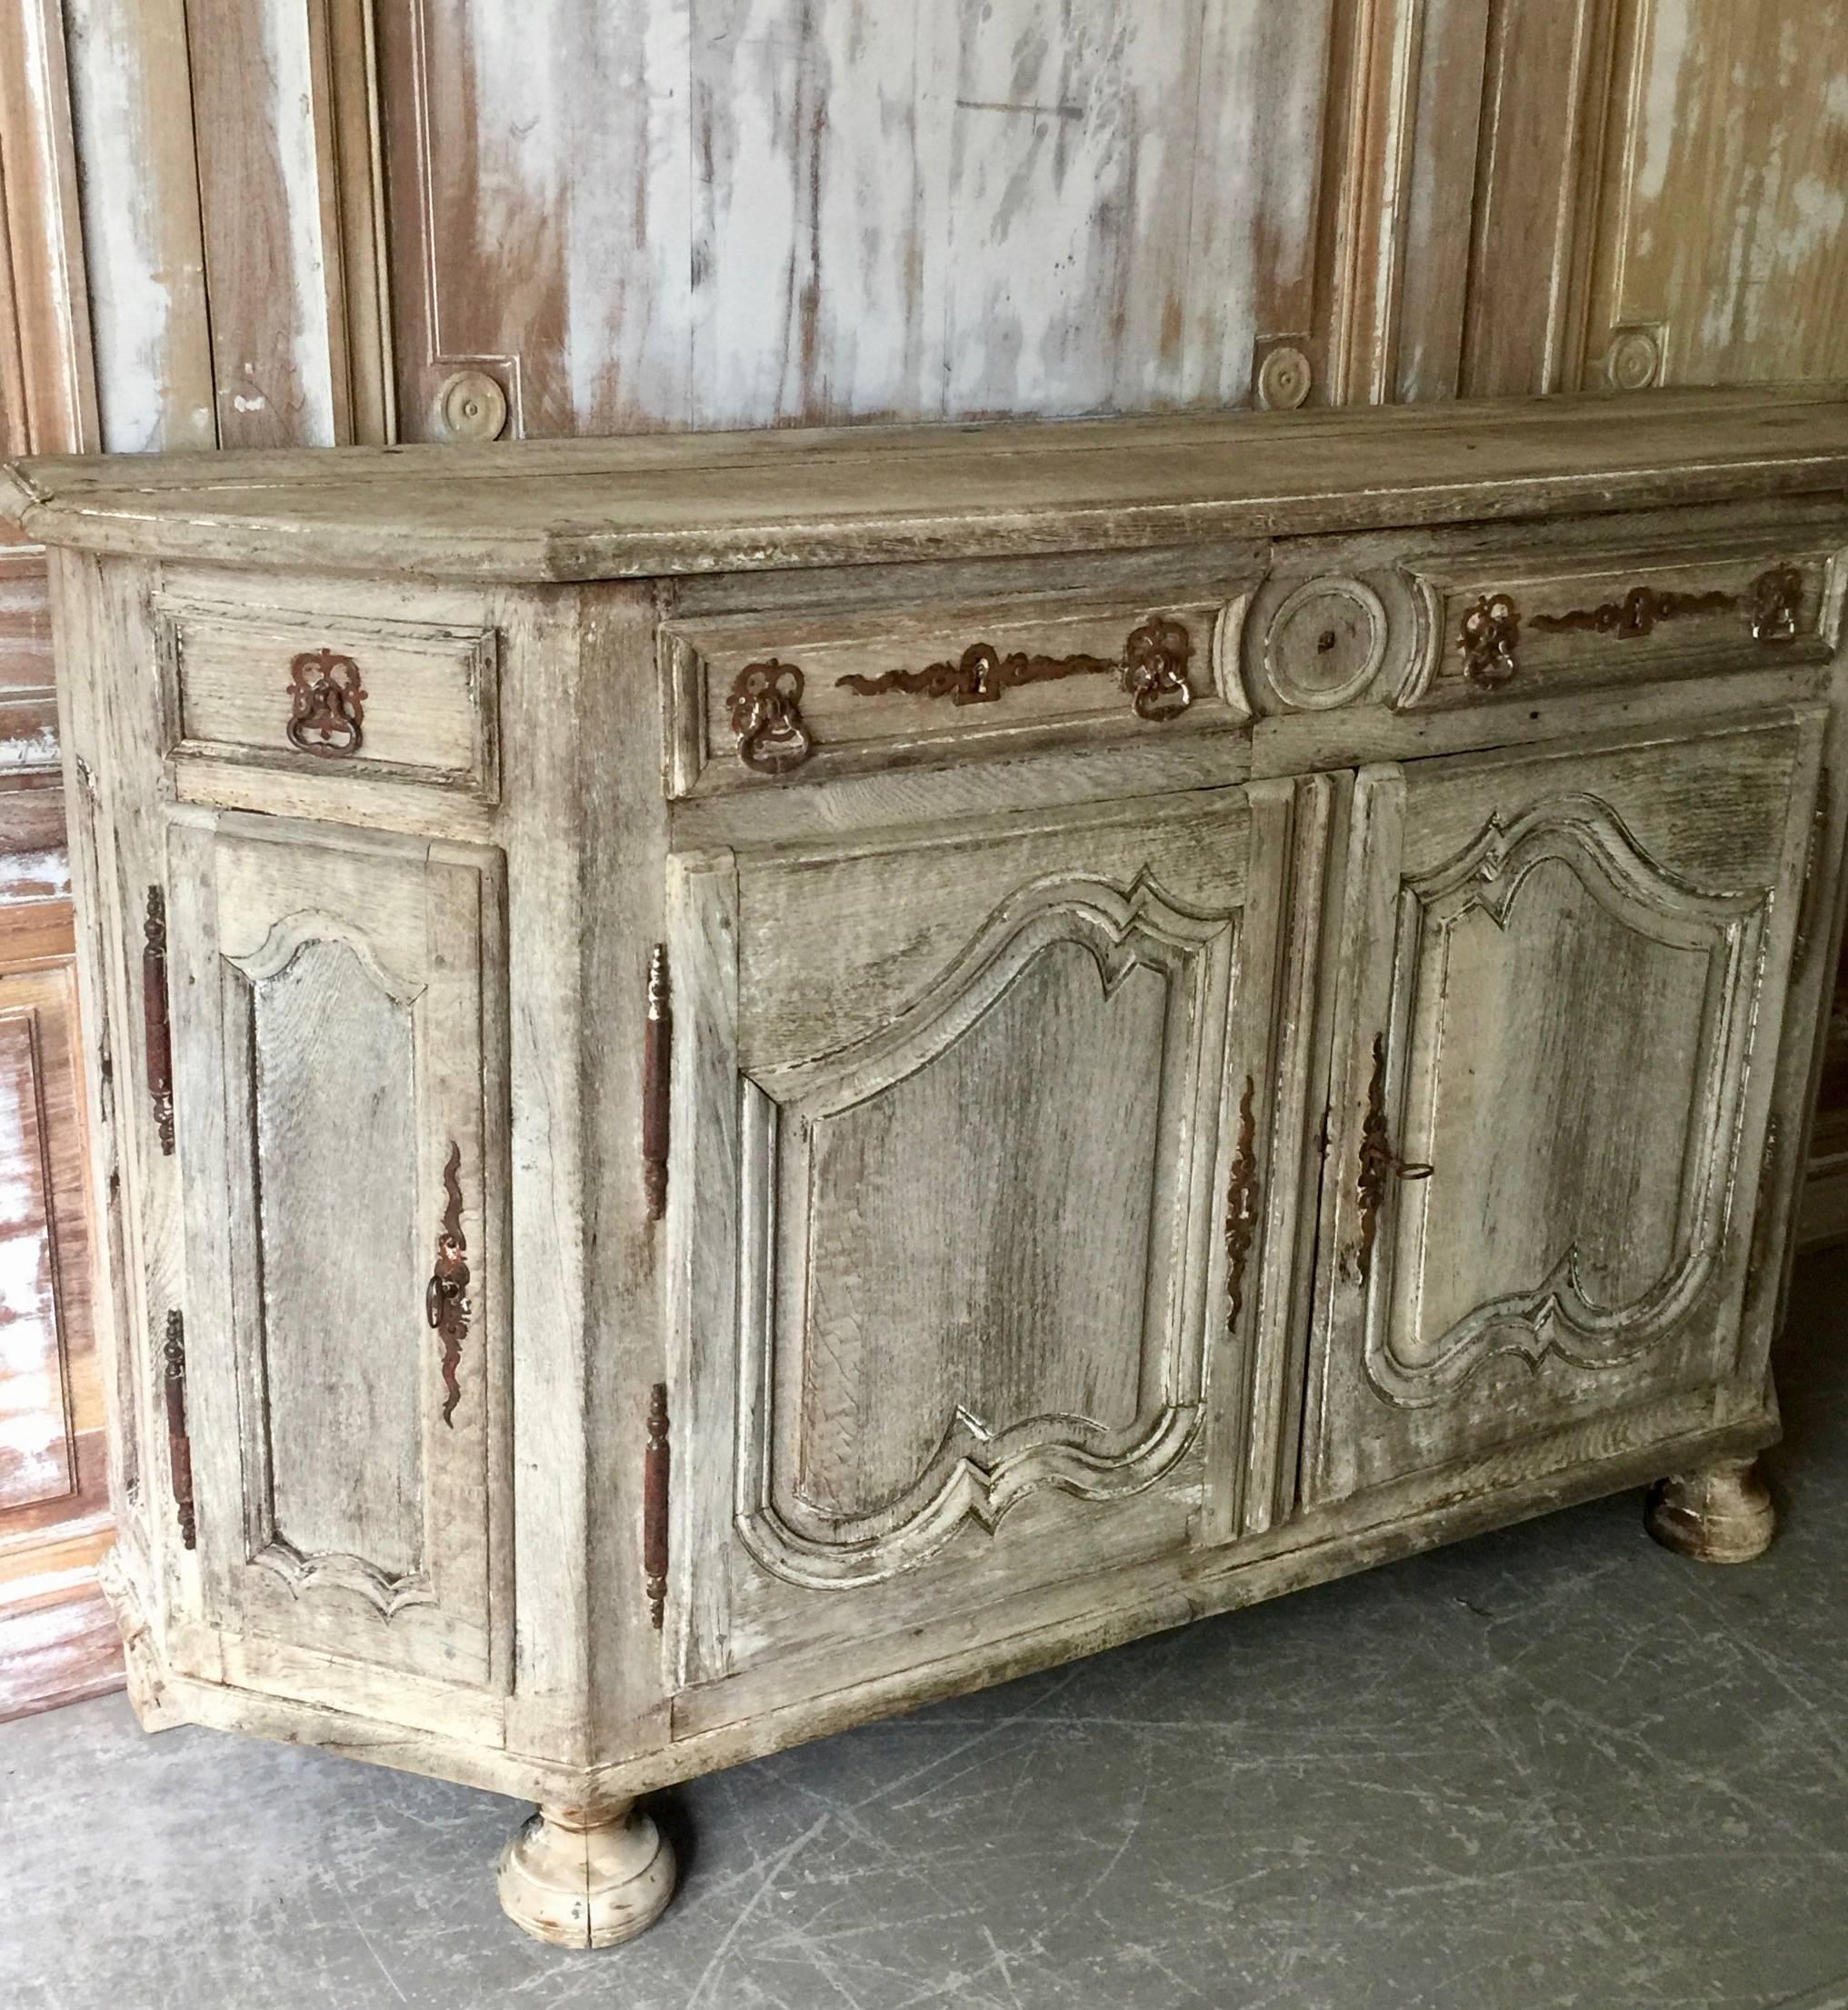 Handsome 18th century French enfilade or sideboard, in Louis XV manner with shaped top and richly carved fielded door panels on front bun feet in superb patinated natural oak. Original rustic ironwork.
France, late 18th century.
More than ever, we